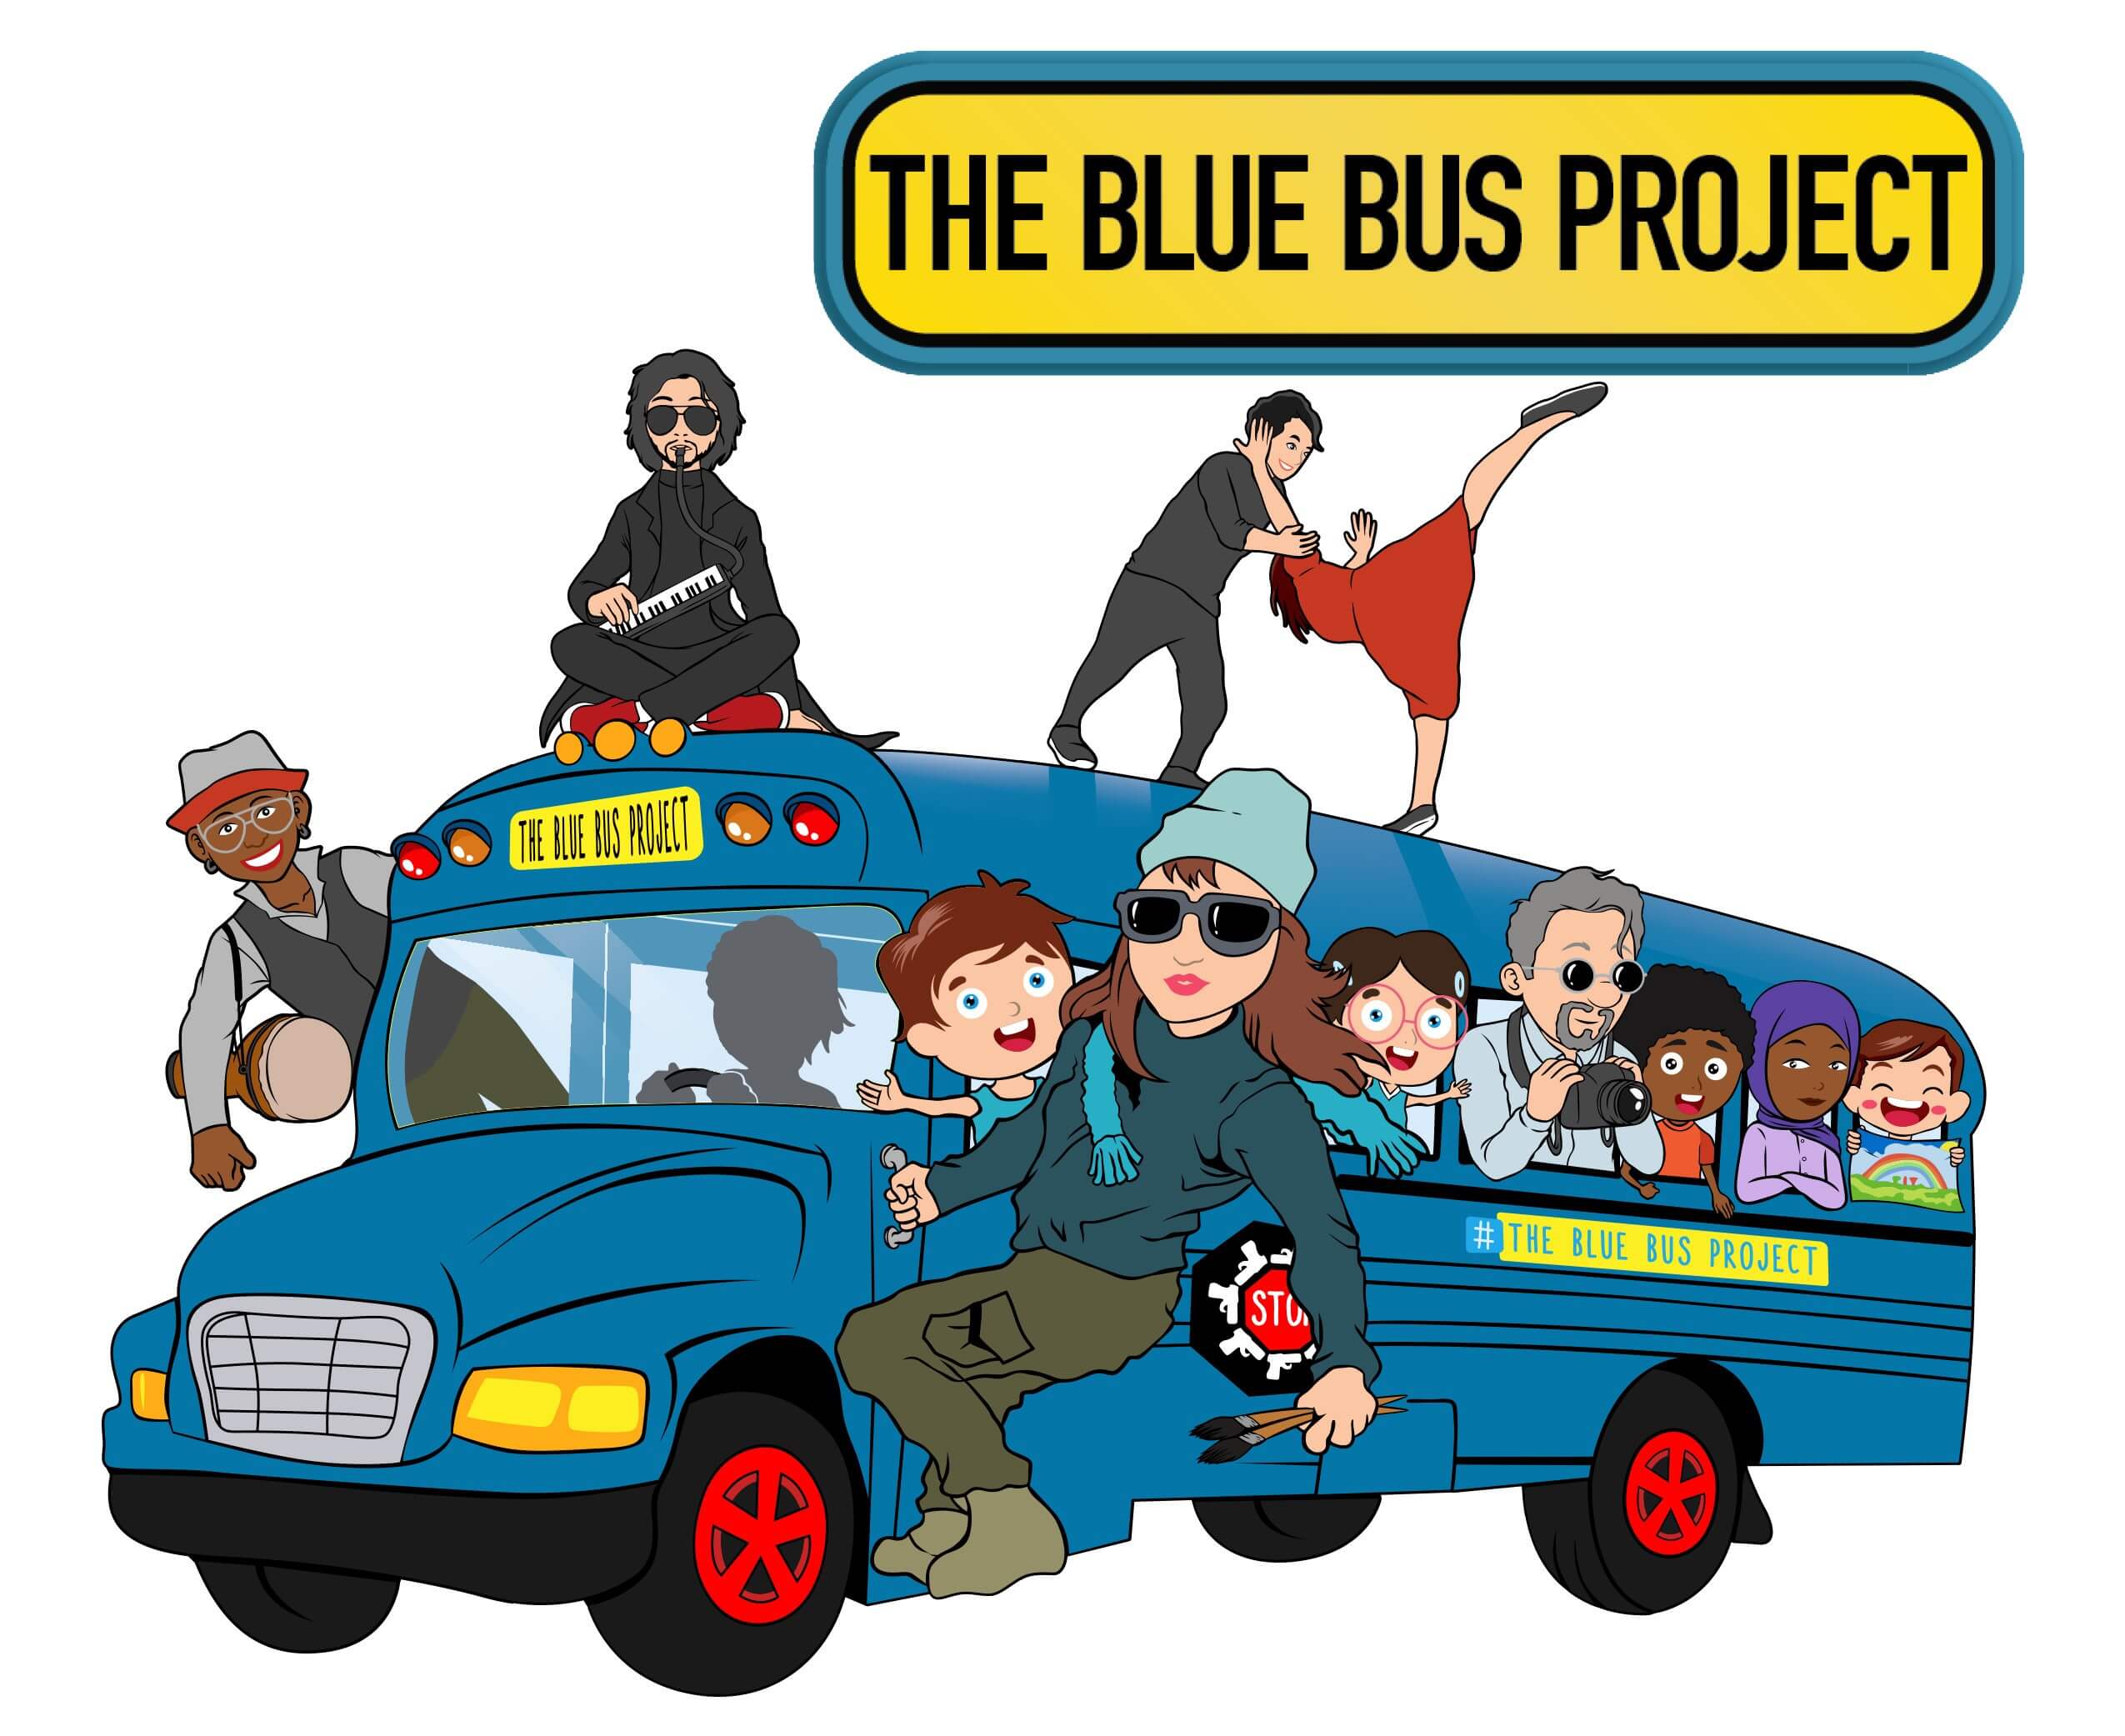 The Blue Bus Project